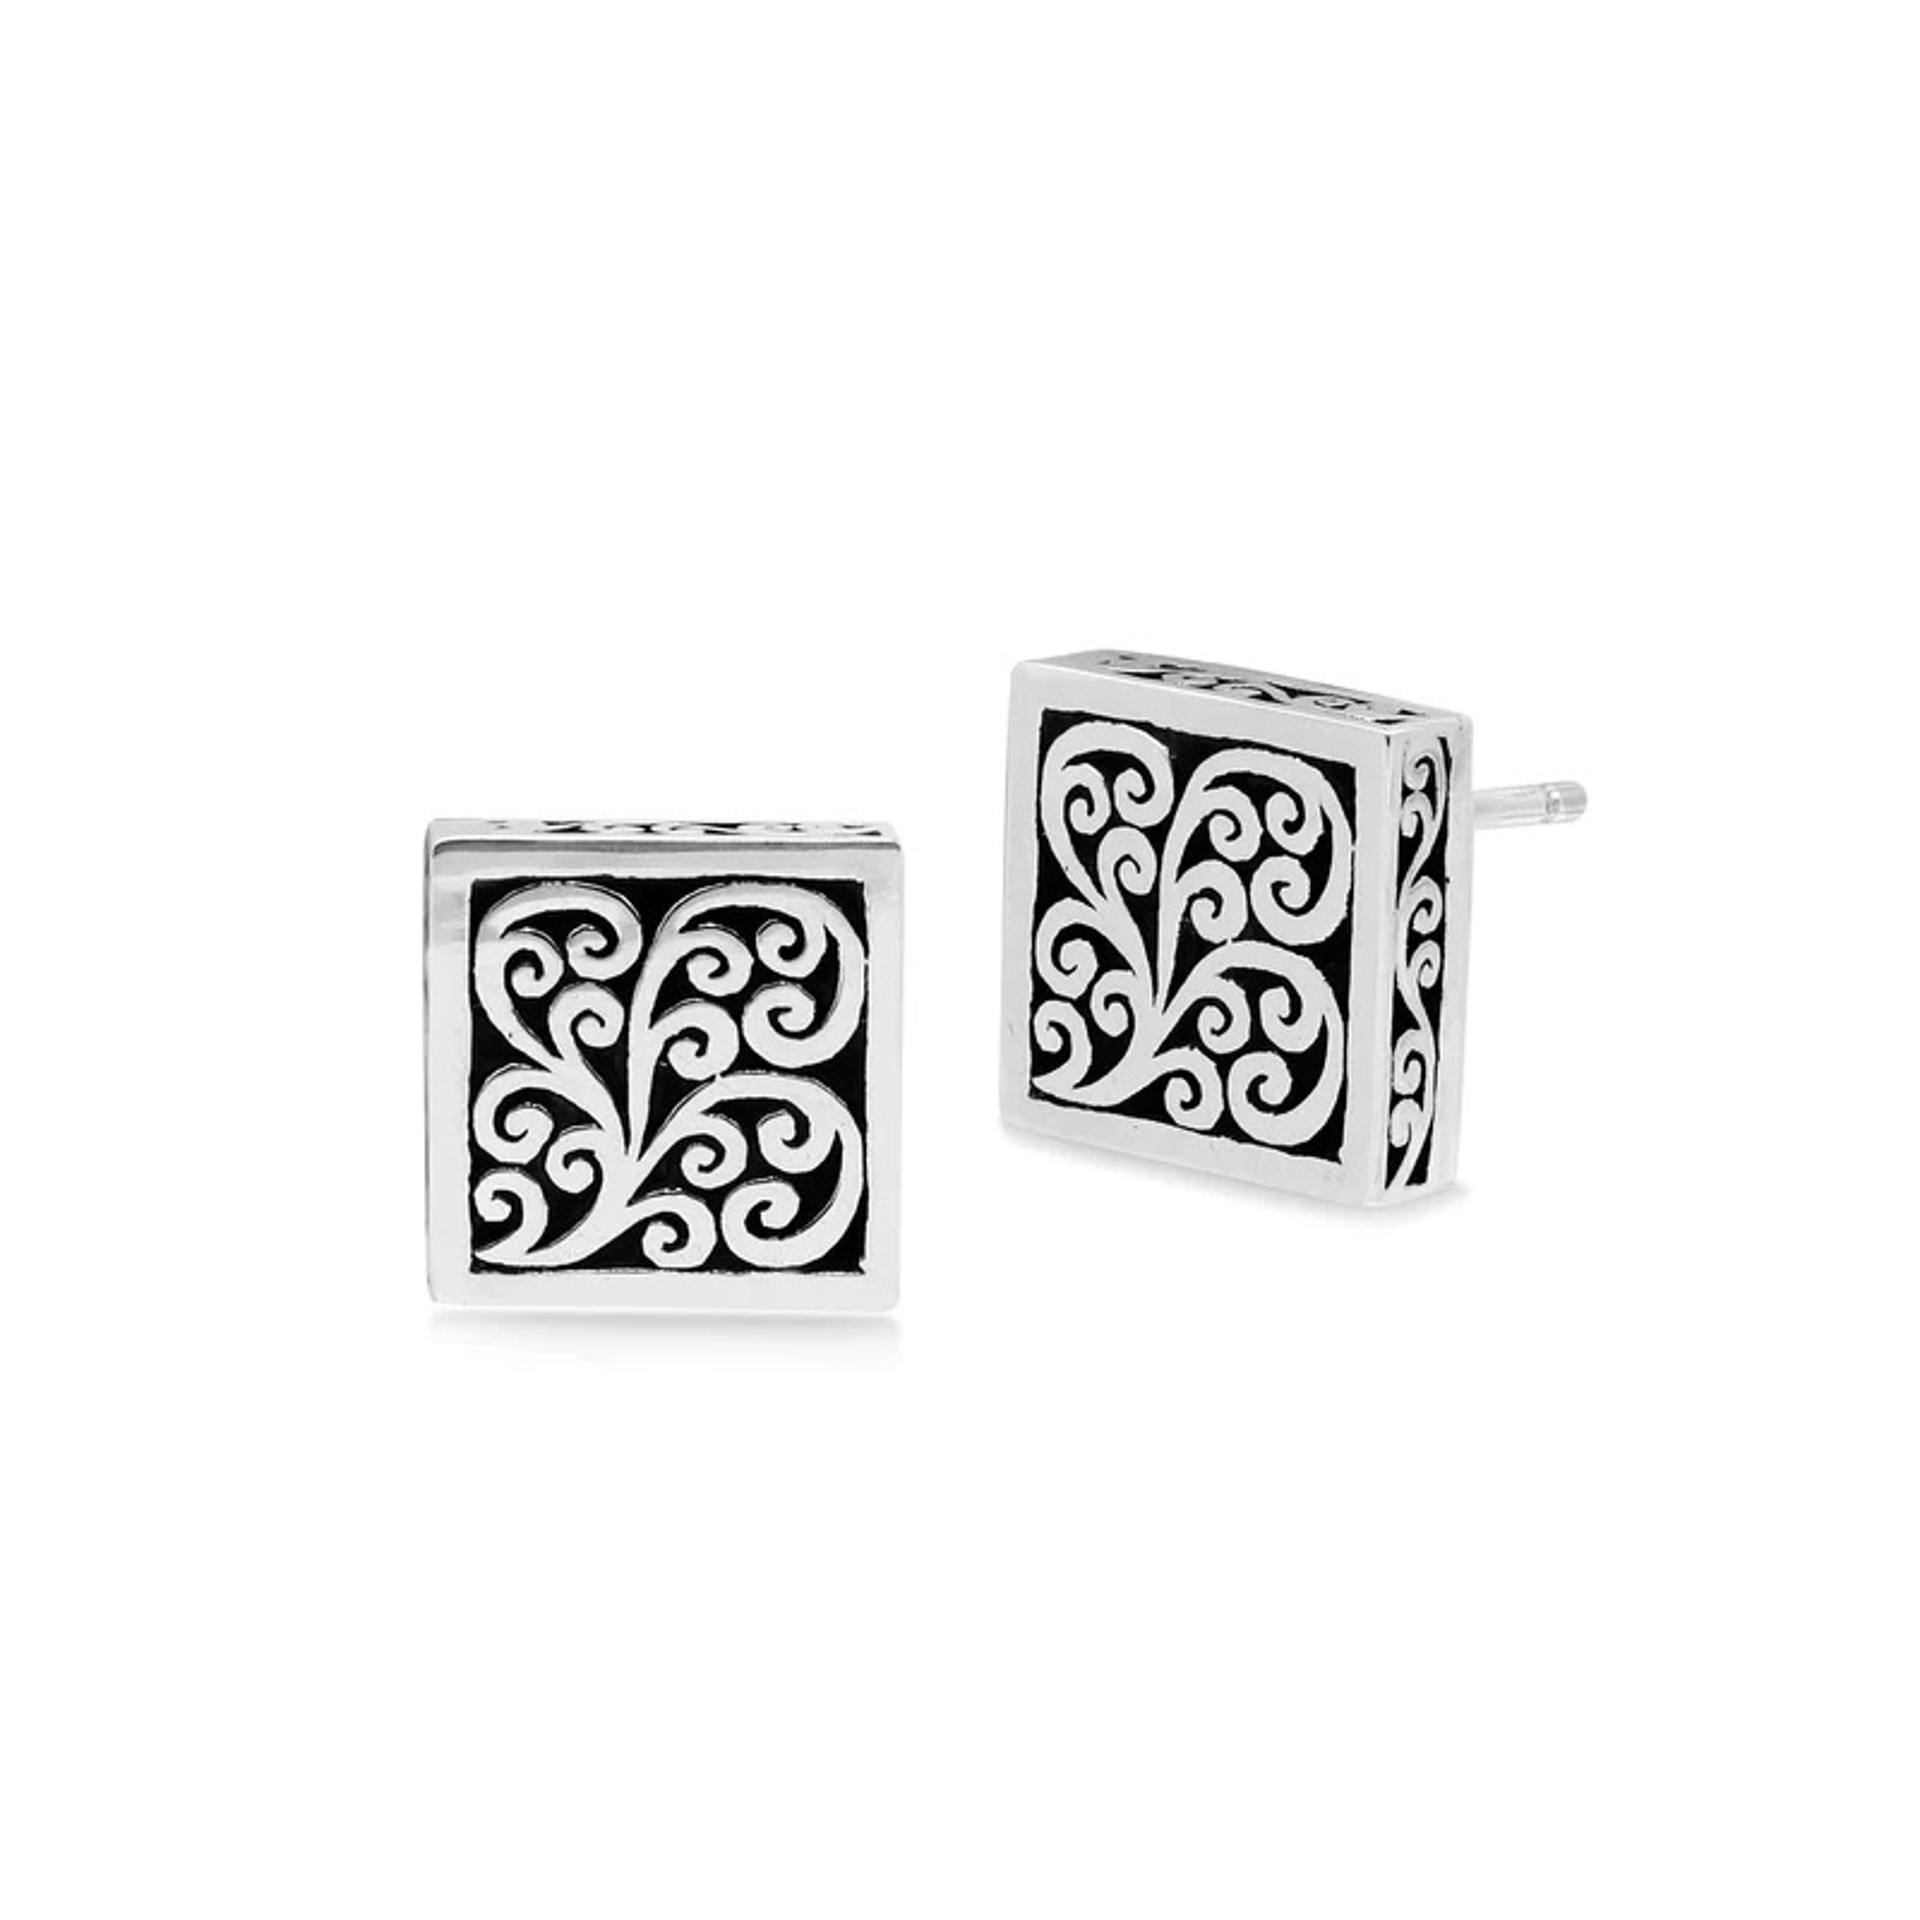 1090 Intricate Scroll Flat Square Stud Earring 13mm (SO) by Lois Hill